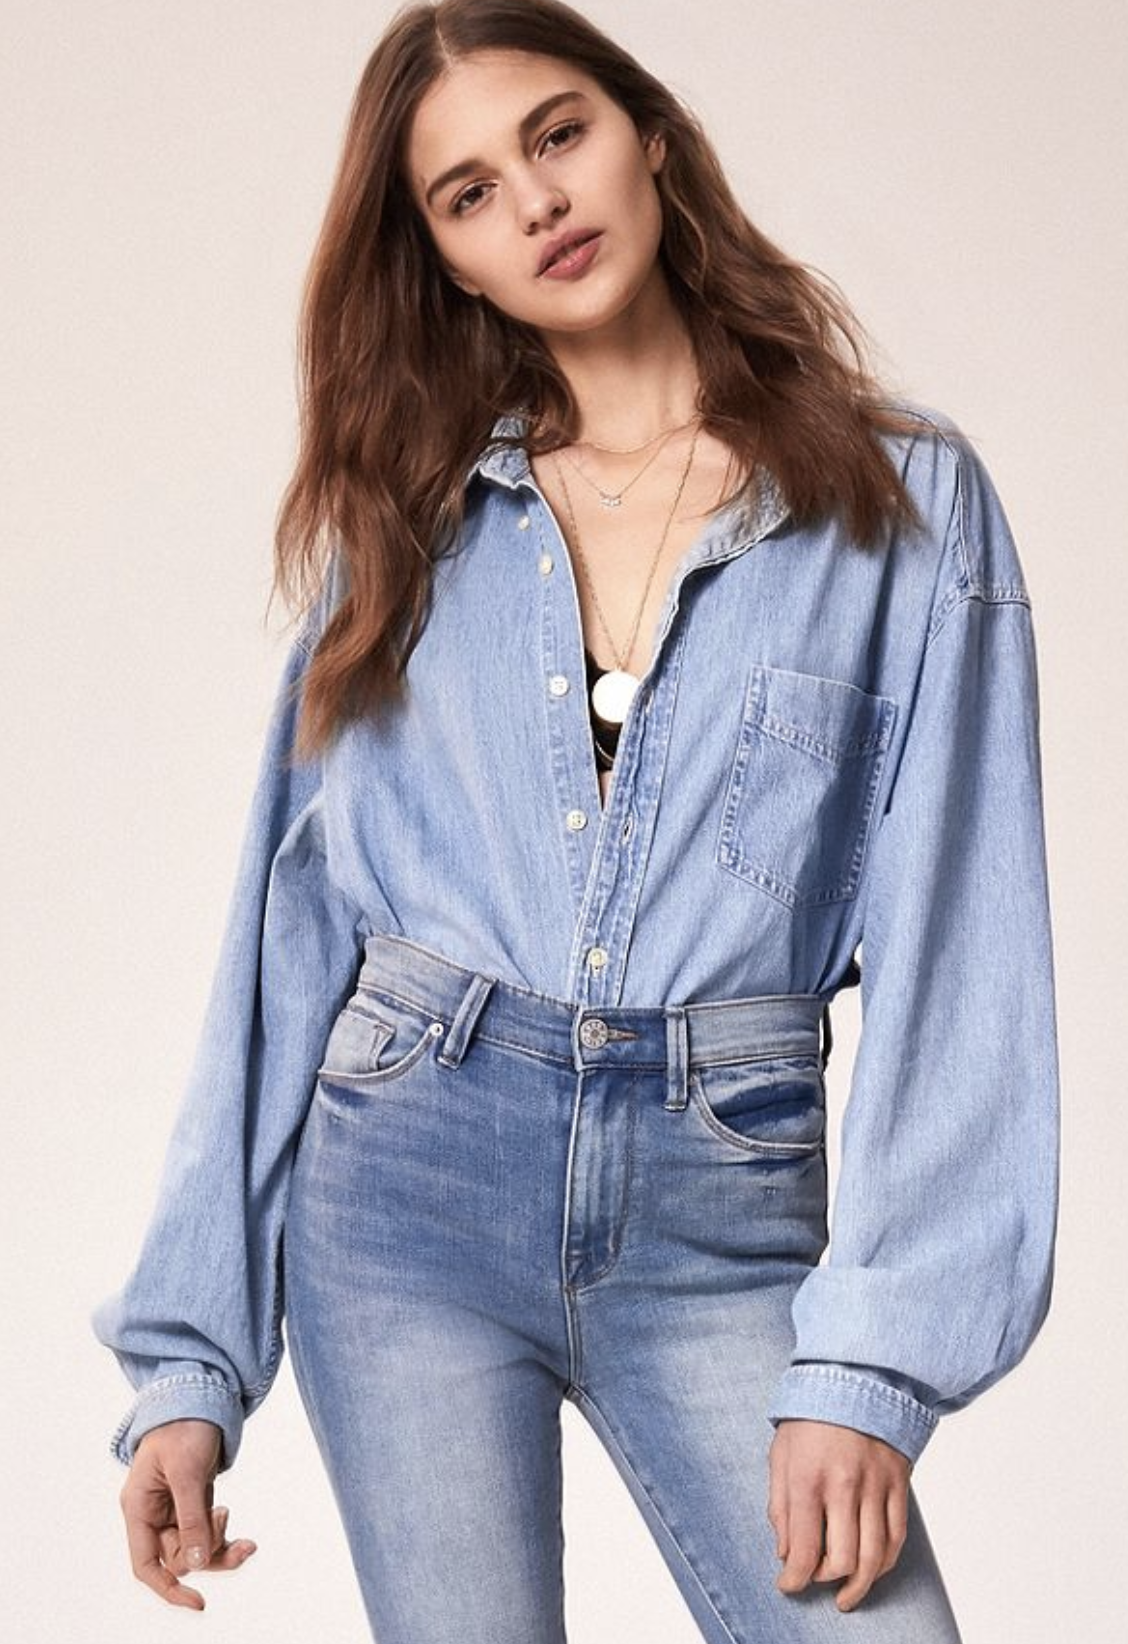 Urban Outfitters Denim Top